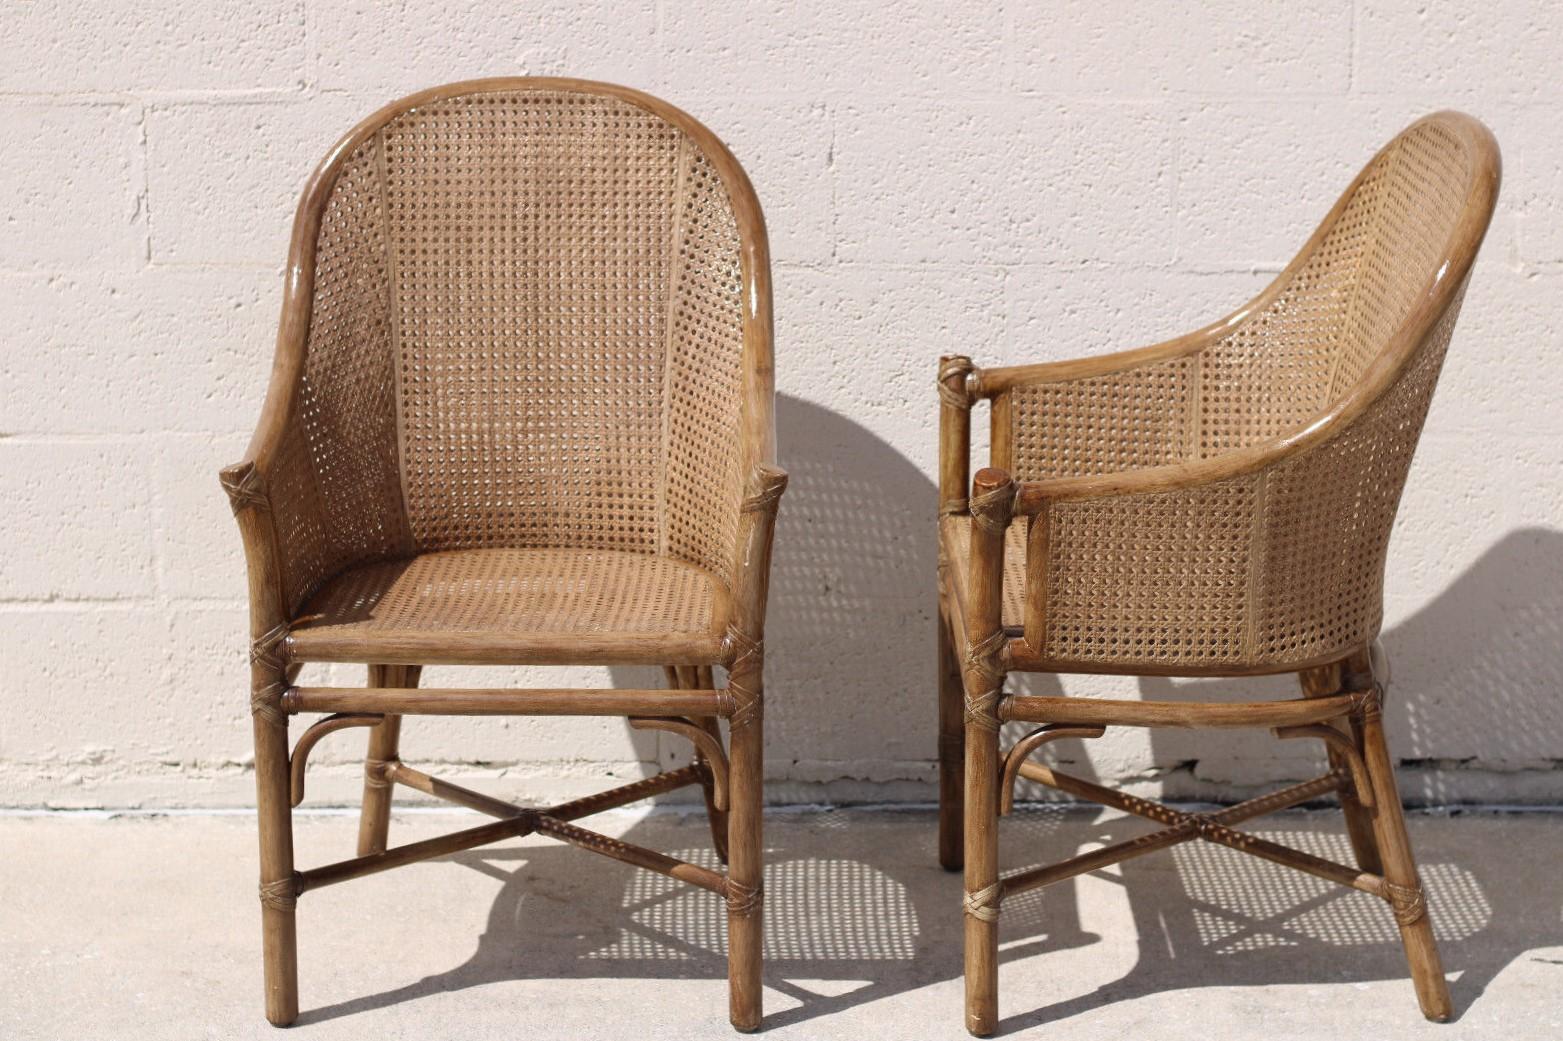 Elinor McGuire Rattan Caned Barrel Back Arm Chairs, a Pair In Good Condition For Sale In Vero Beach, FL